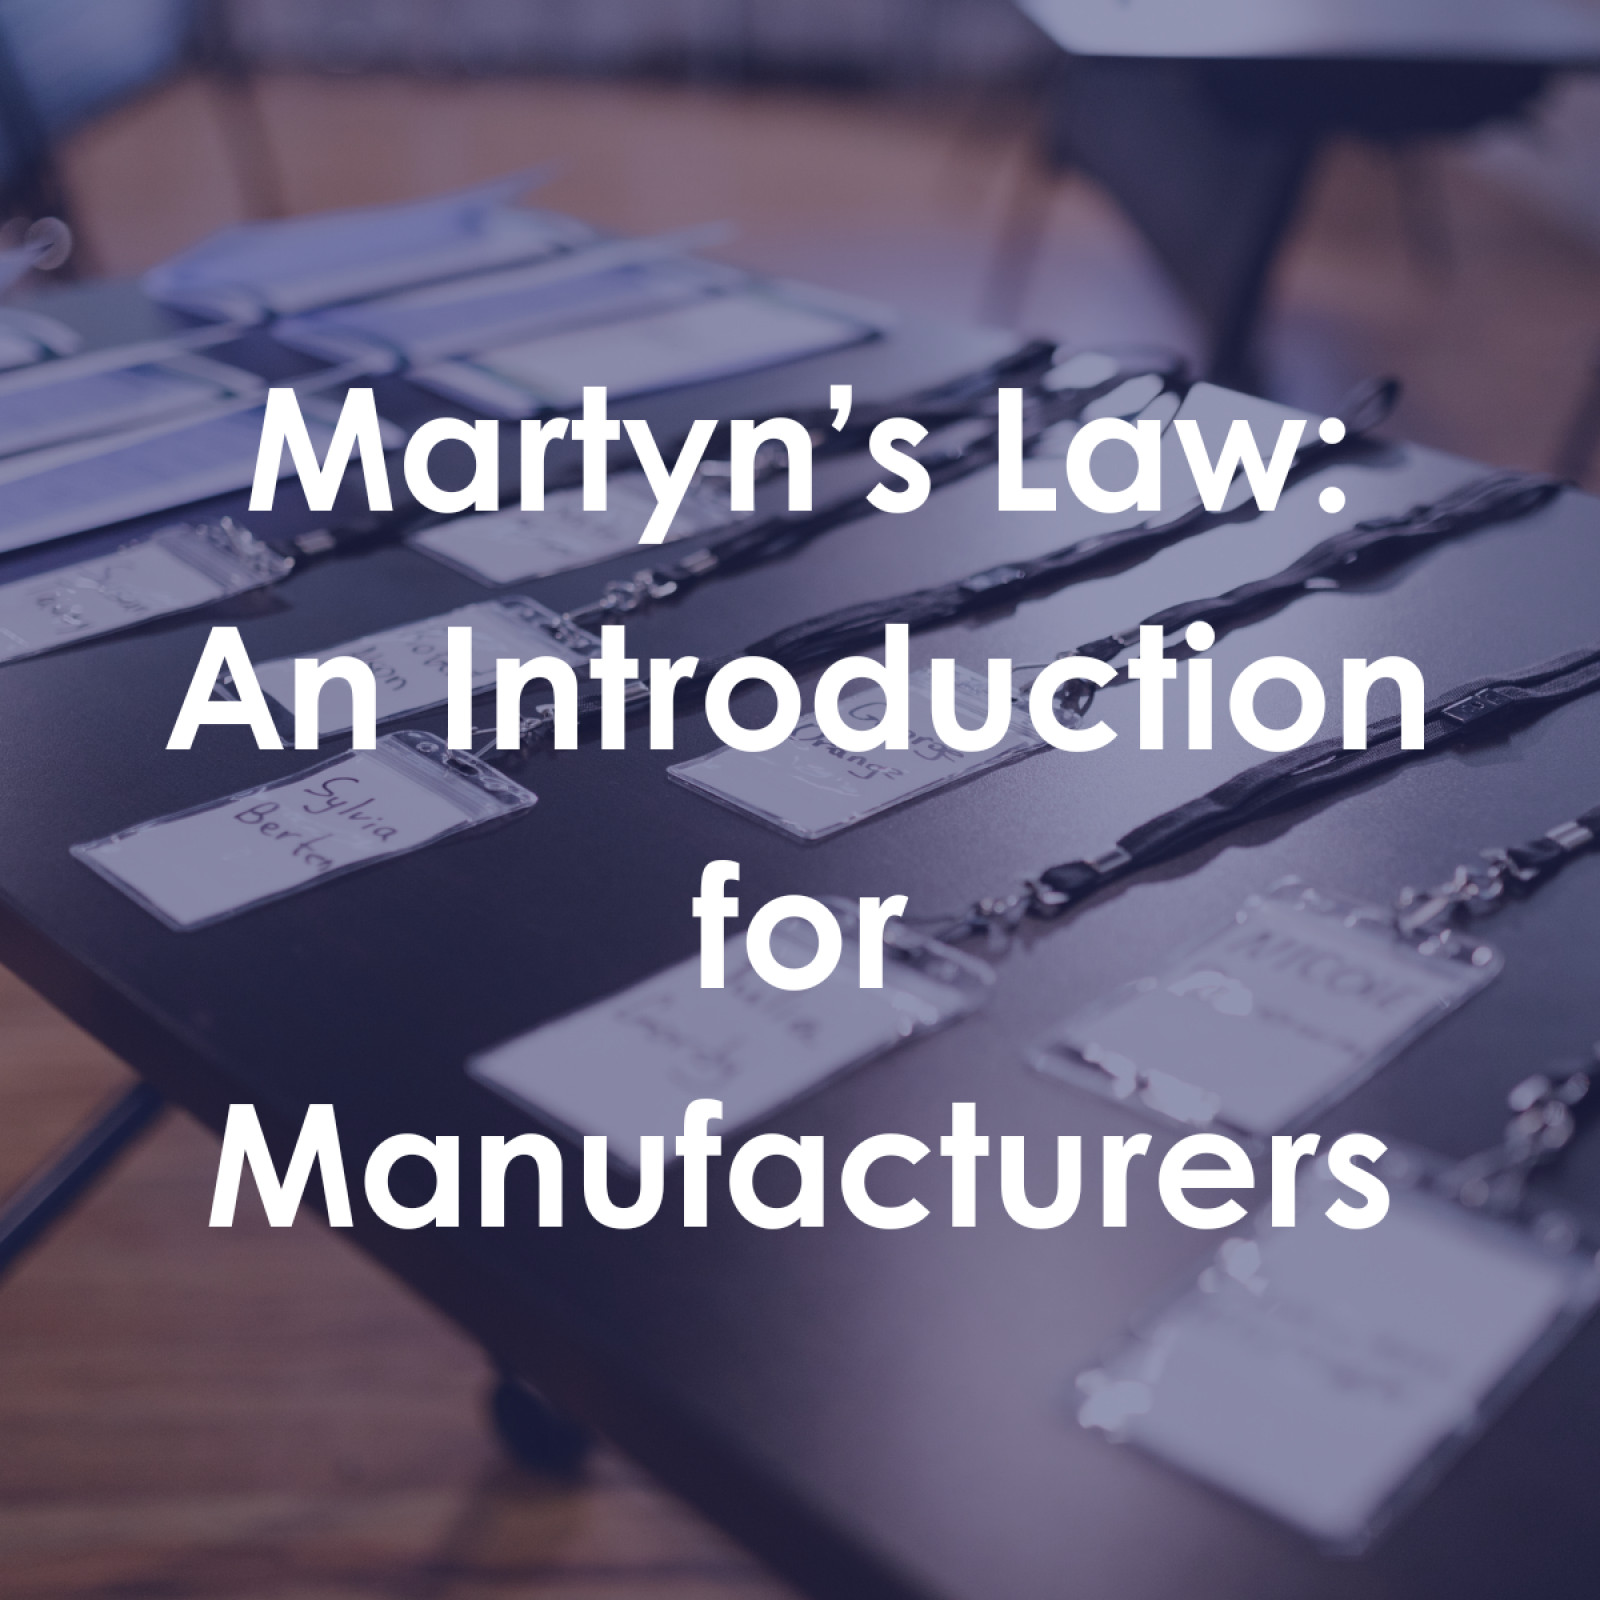 Martyn's Law: An Introduction for Manufacturers